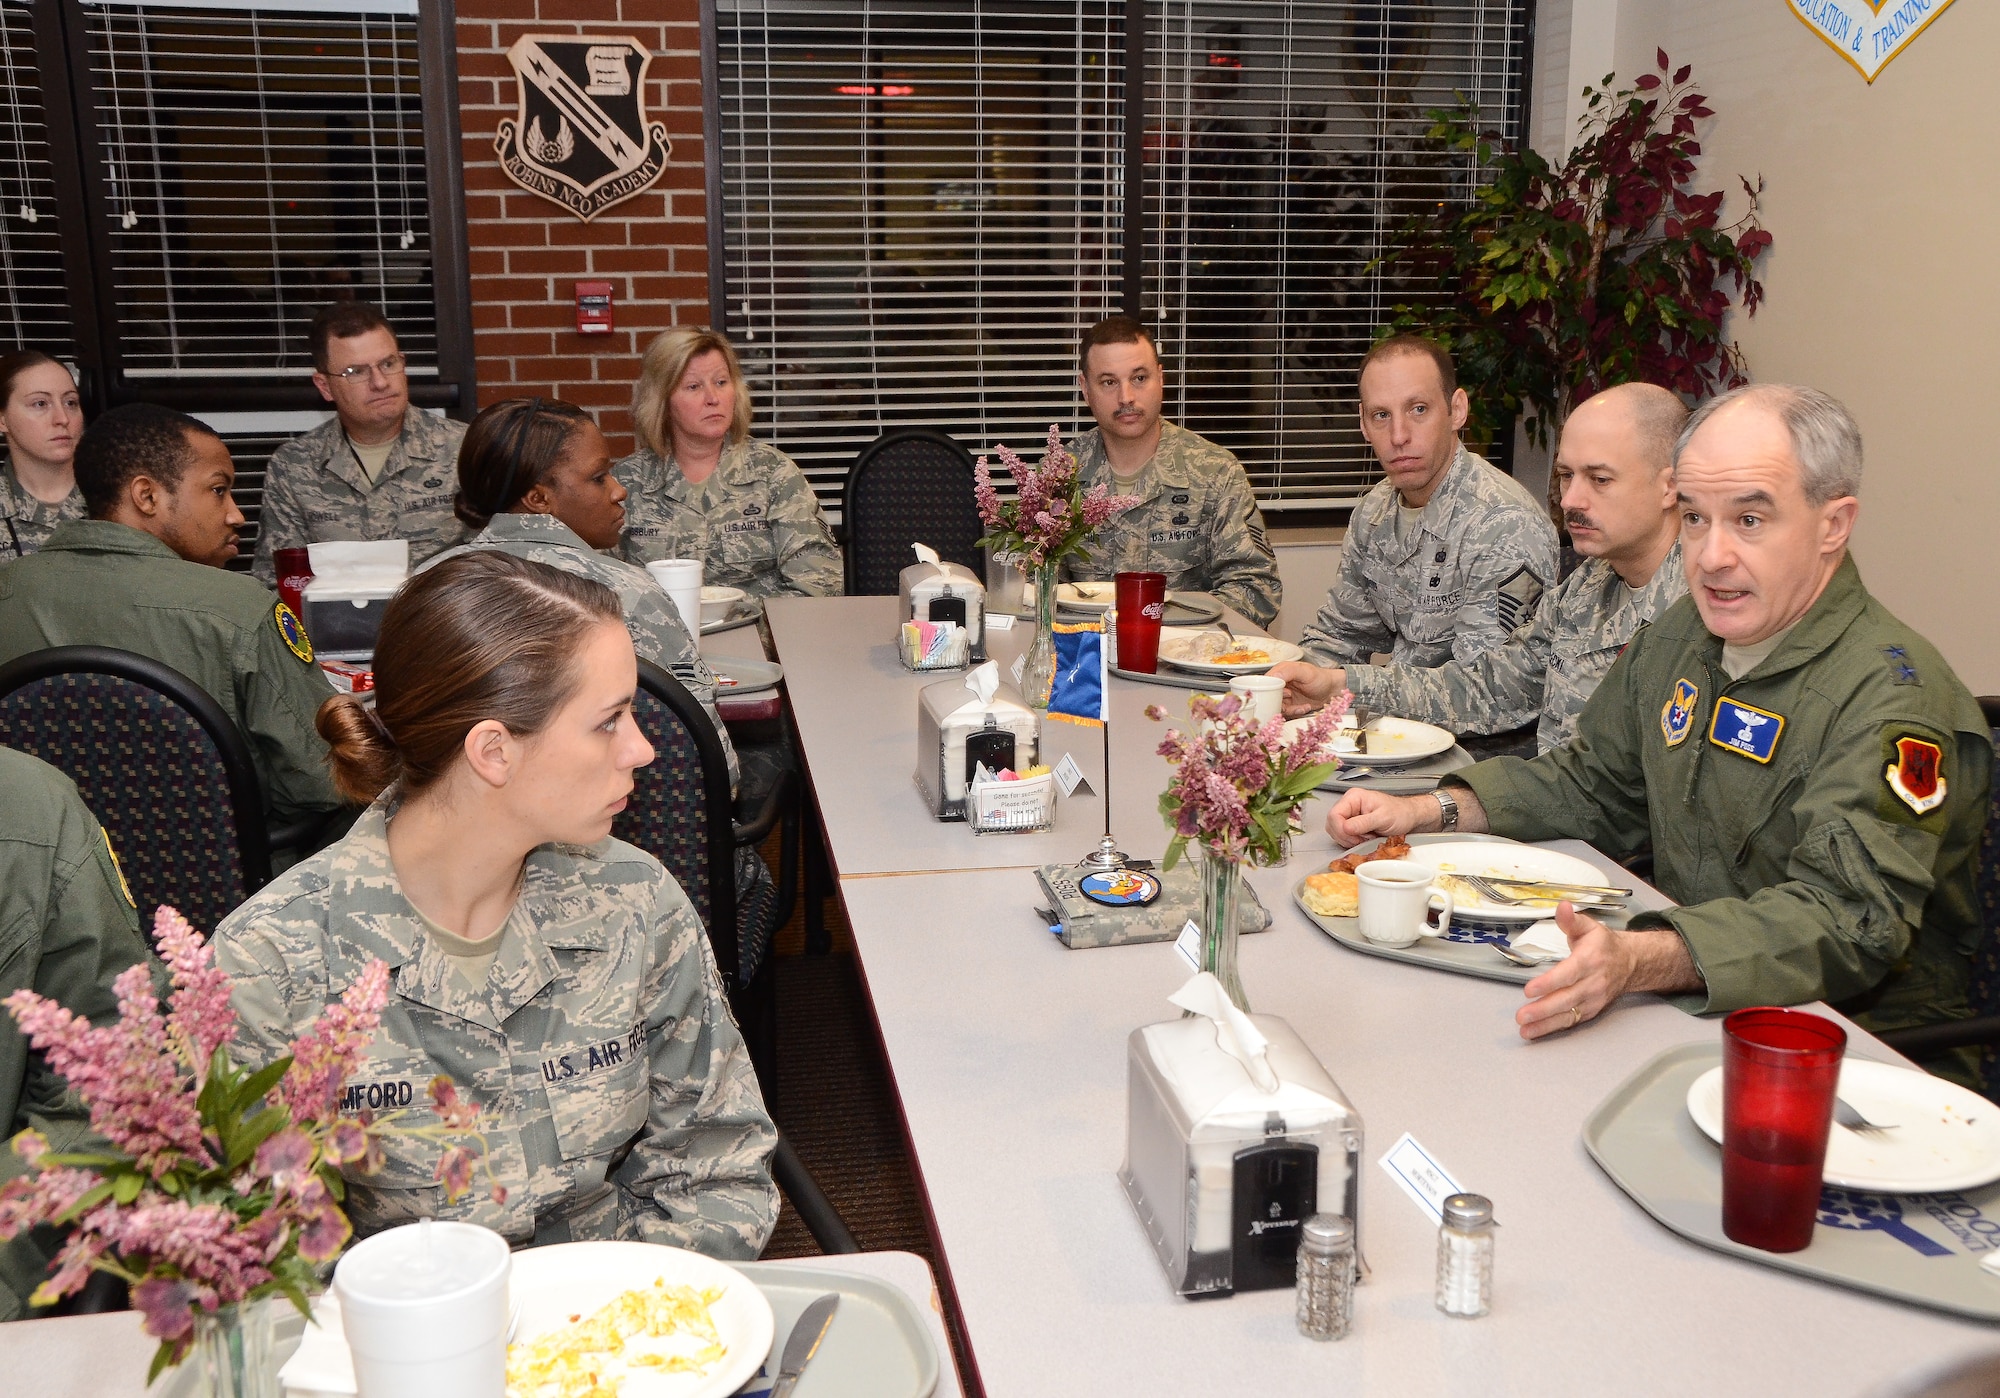 Maj. Gen. James Poss, right, assistant deputy chief of staff for intelligence, surveillance and reconnaissance, Headquarters U.S. Air Force, speaks to enlisted intelligence personnel from the 461st and 116th Air Control Wings during a breakfast at the Wynn Dining Facility, Robins Air Force Base, Ga., Jan. 26, 2012.  Poss met with intelligence personnel at Robins during a two-day  intelligence organizations site visit. (National Guard photo by Master Sgt. Roger Parsons/Released)